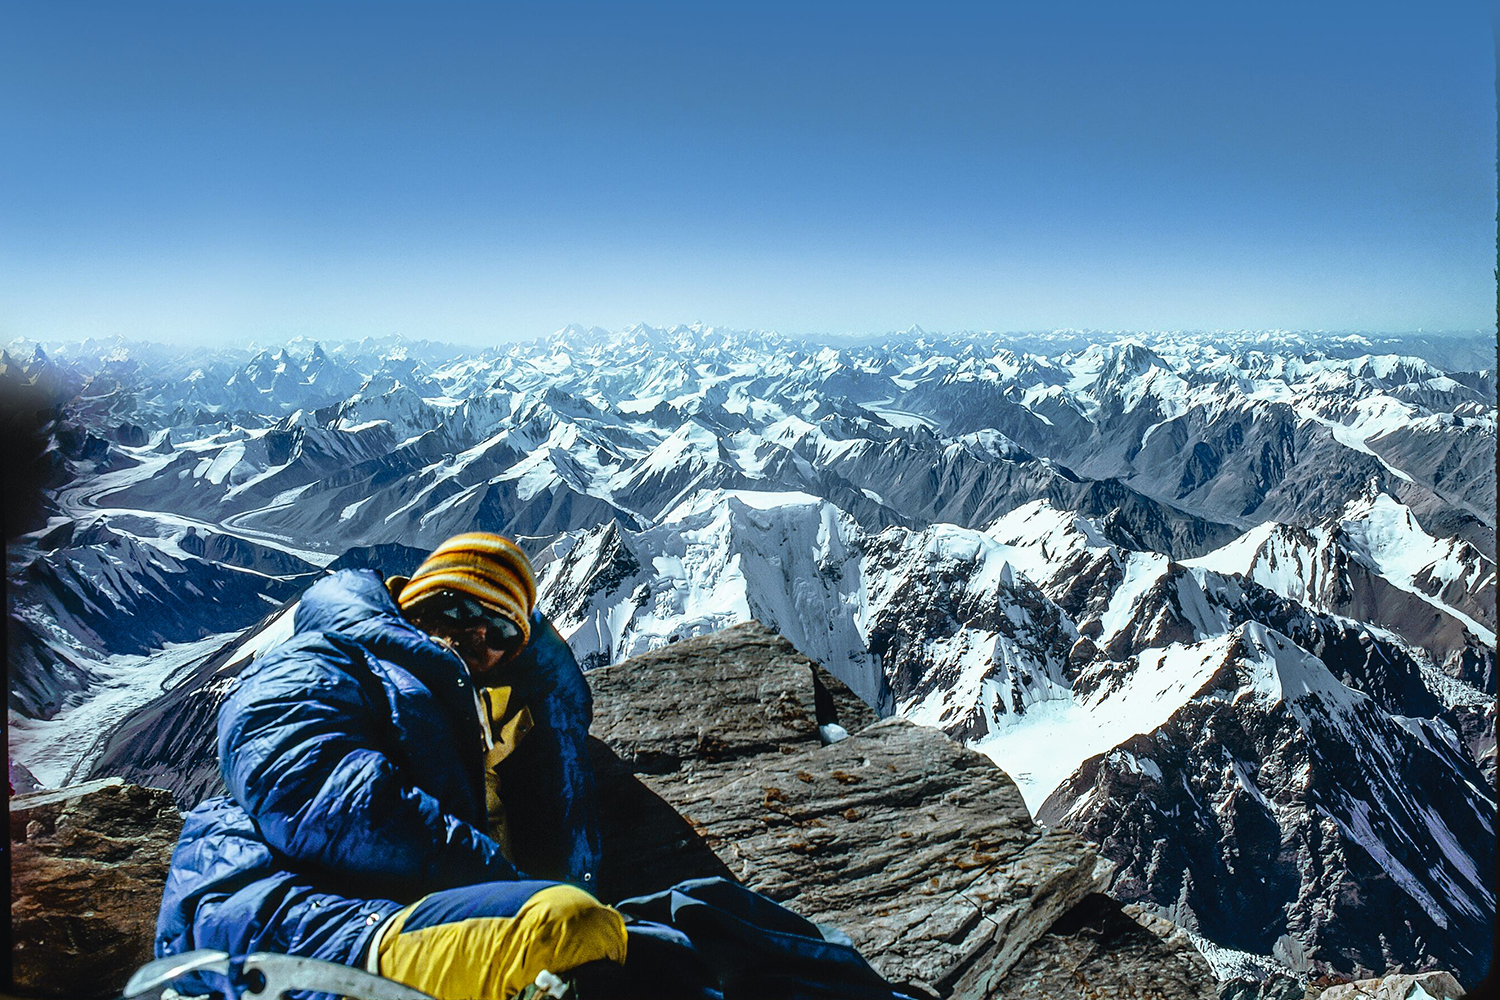 Rick Ridgeway on the summit of K2 in September 1978 huddled in a blue coat with a sea of snow-capped mountains in the background